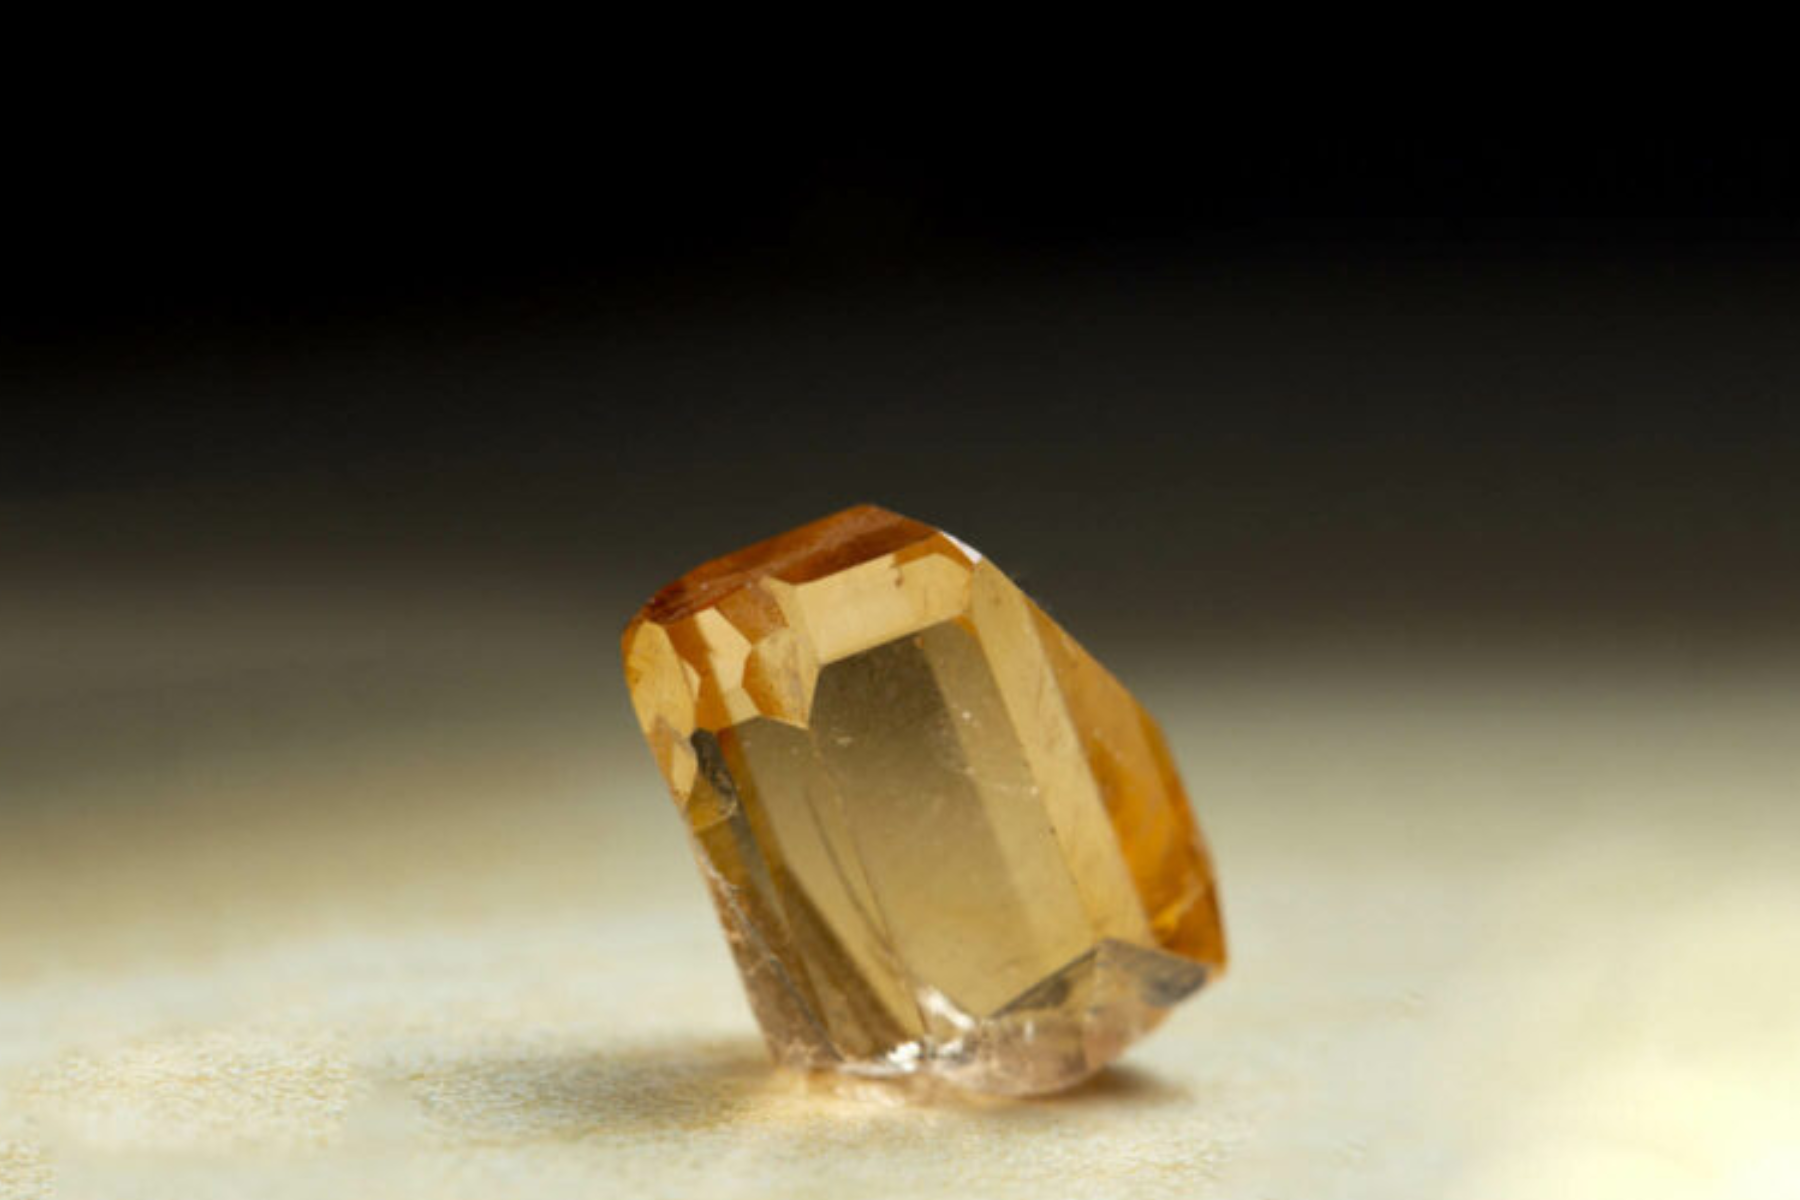 A piece of topaz stone on the floor